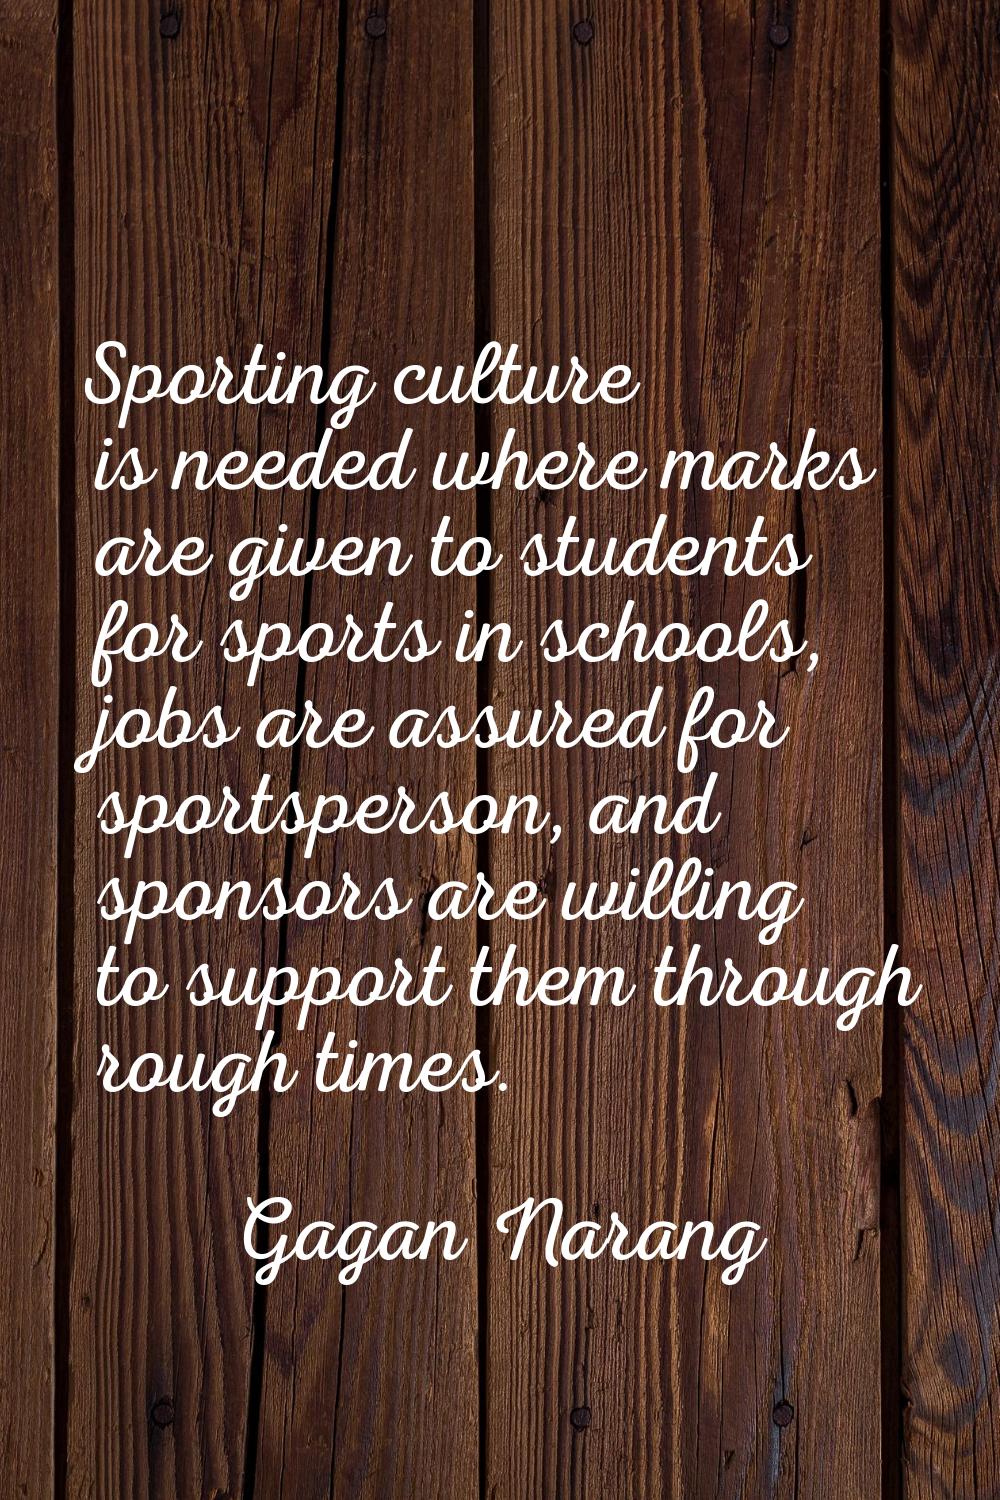 Sporting culture is needed where marks are given to students for sports in schools, jobs are assure